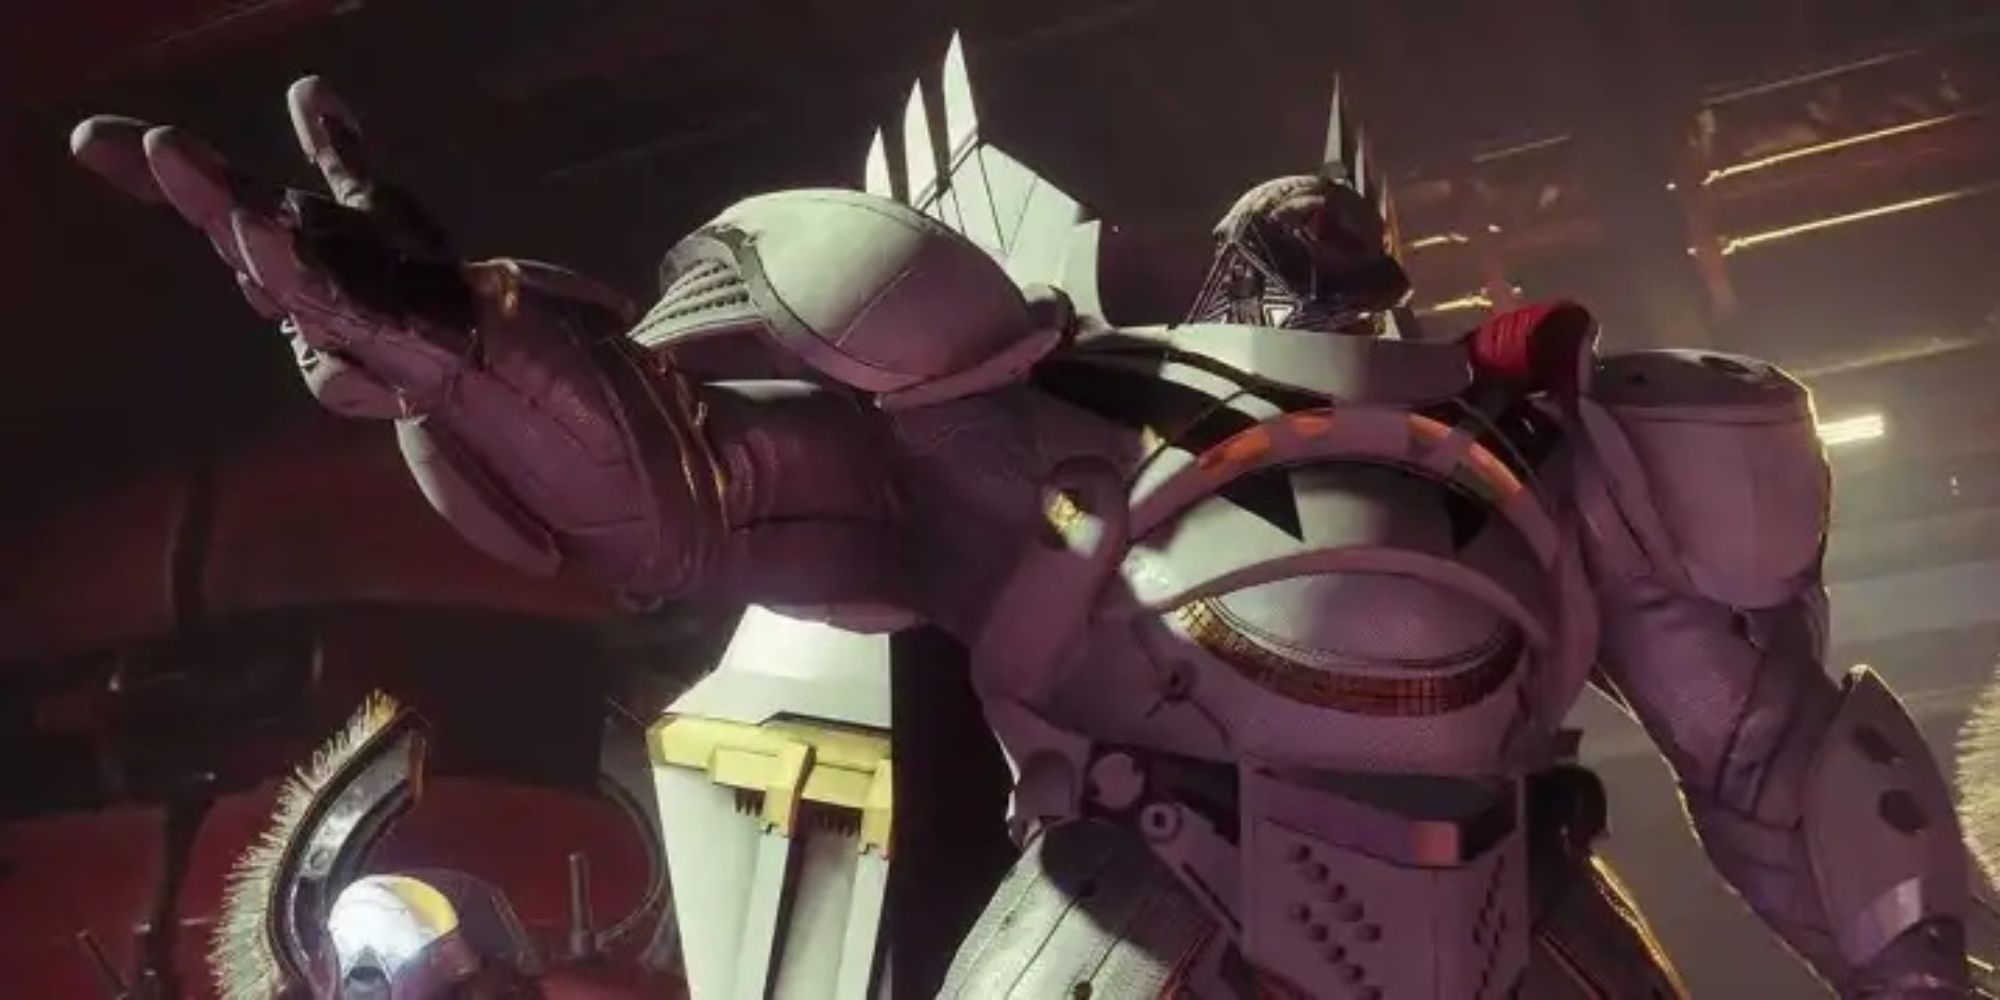 Destiny 2 Bungie MMO FPS Ghaul, Cabal Leader in an early game scene shot